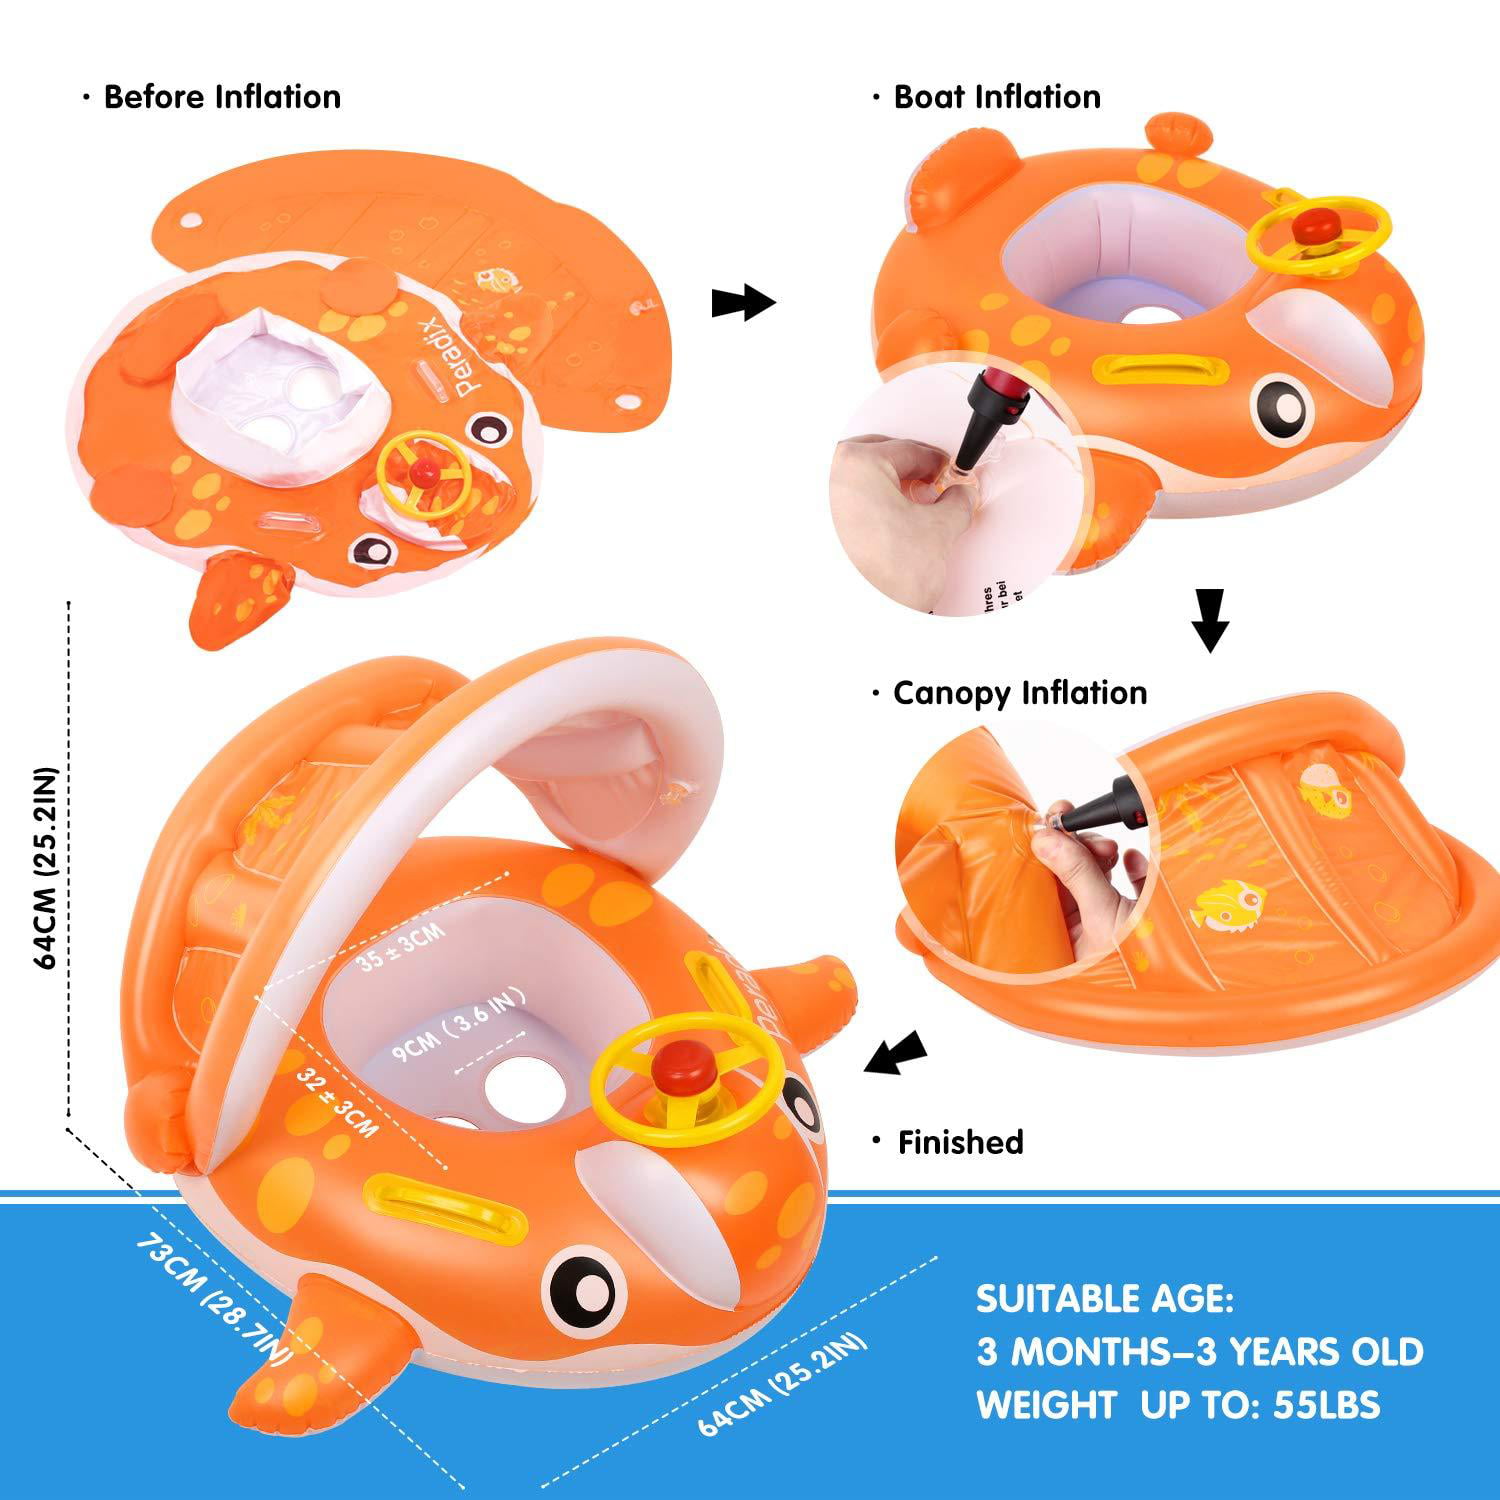 Whale Theme Infants Water Toys Inf Details about   Peradix Baby Pool Float With Canopy Sunshade 